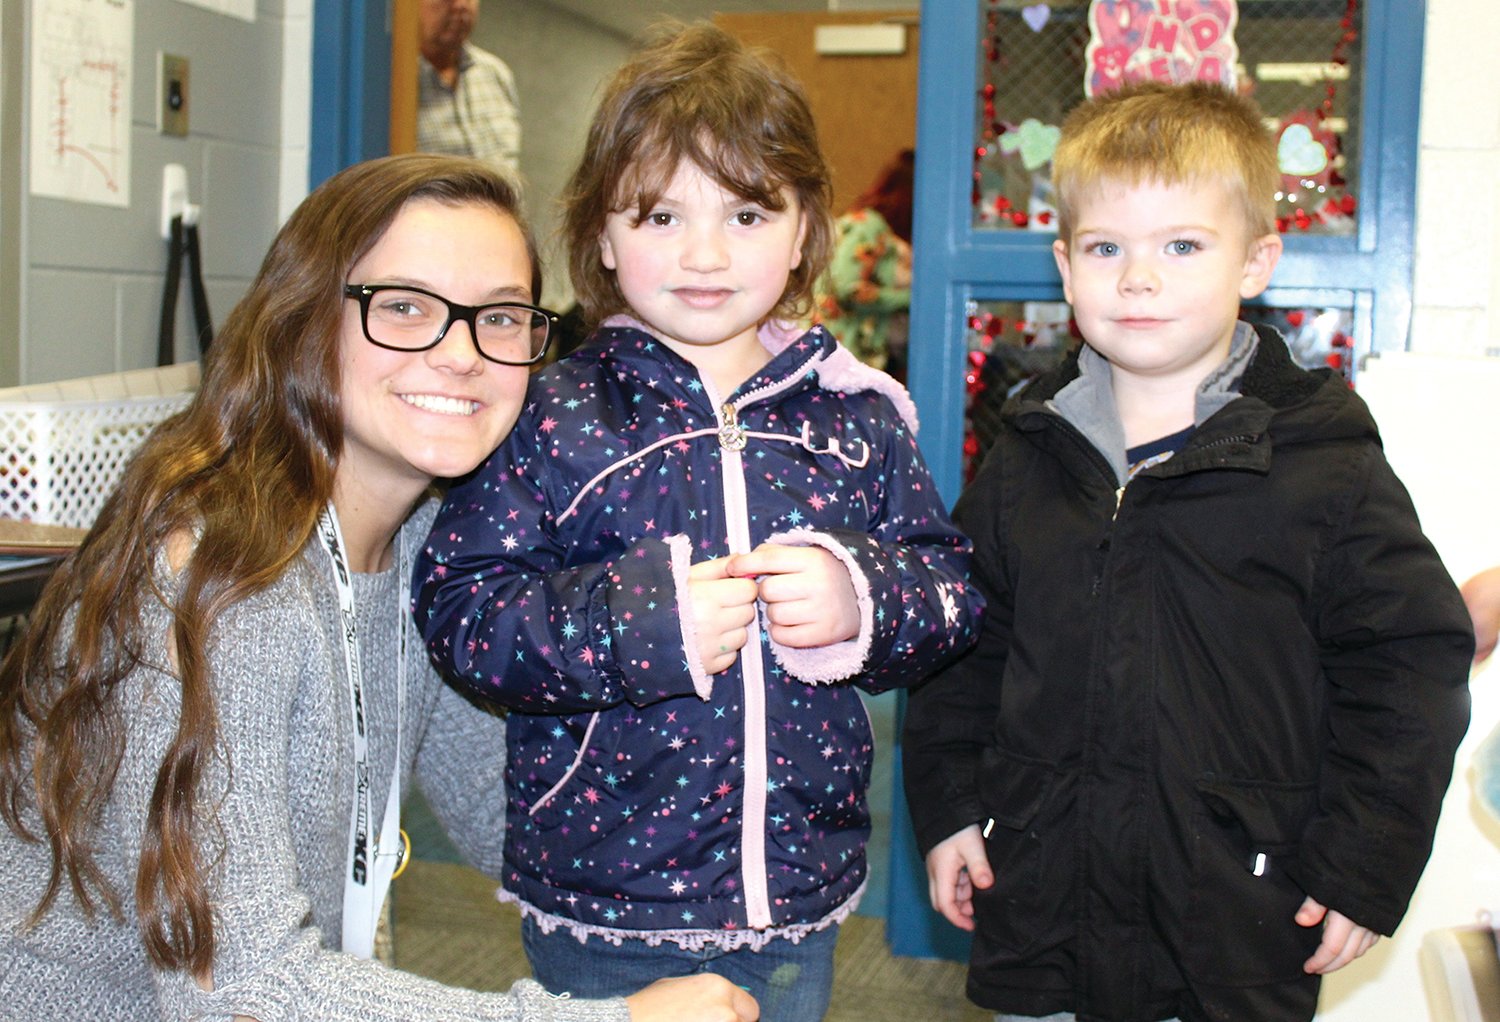 Little Mountie Preschool Aide Hailey France, from left, and students Stella Hughes and Kasen Jones put on their coats as they prepare to end the day and head home from Walnut Elementary.